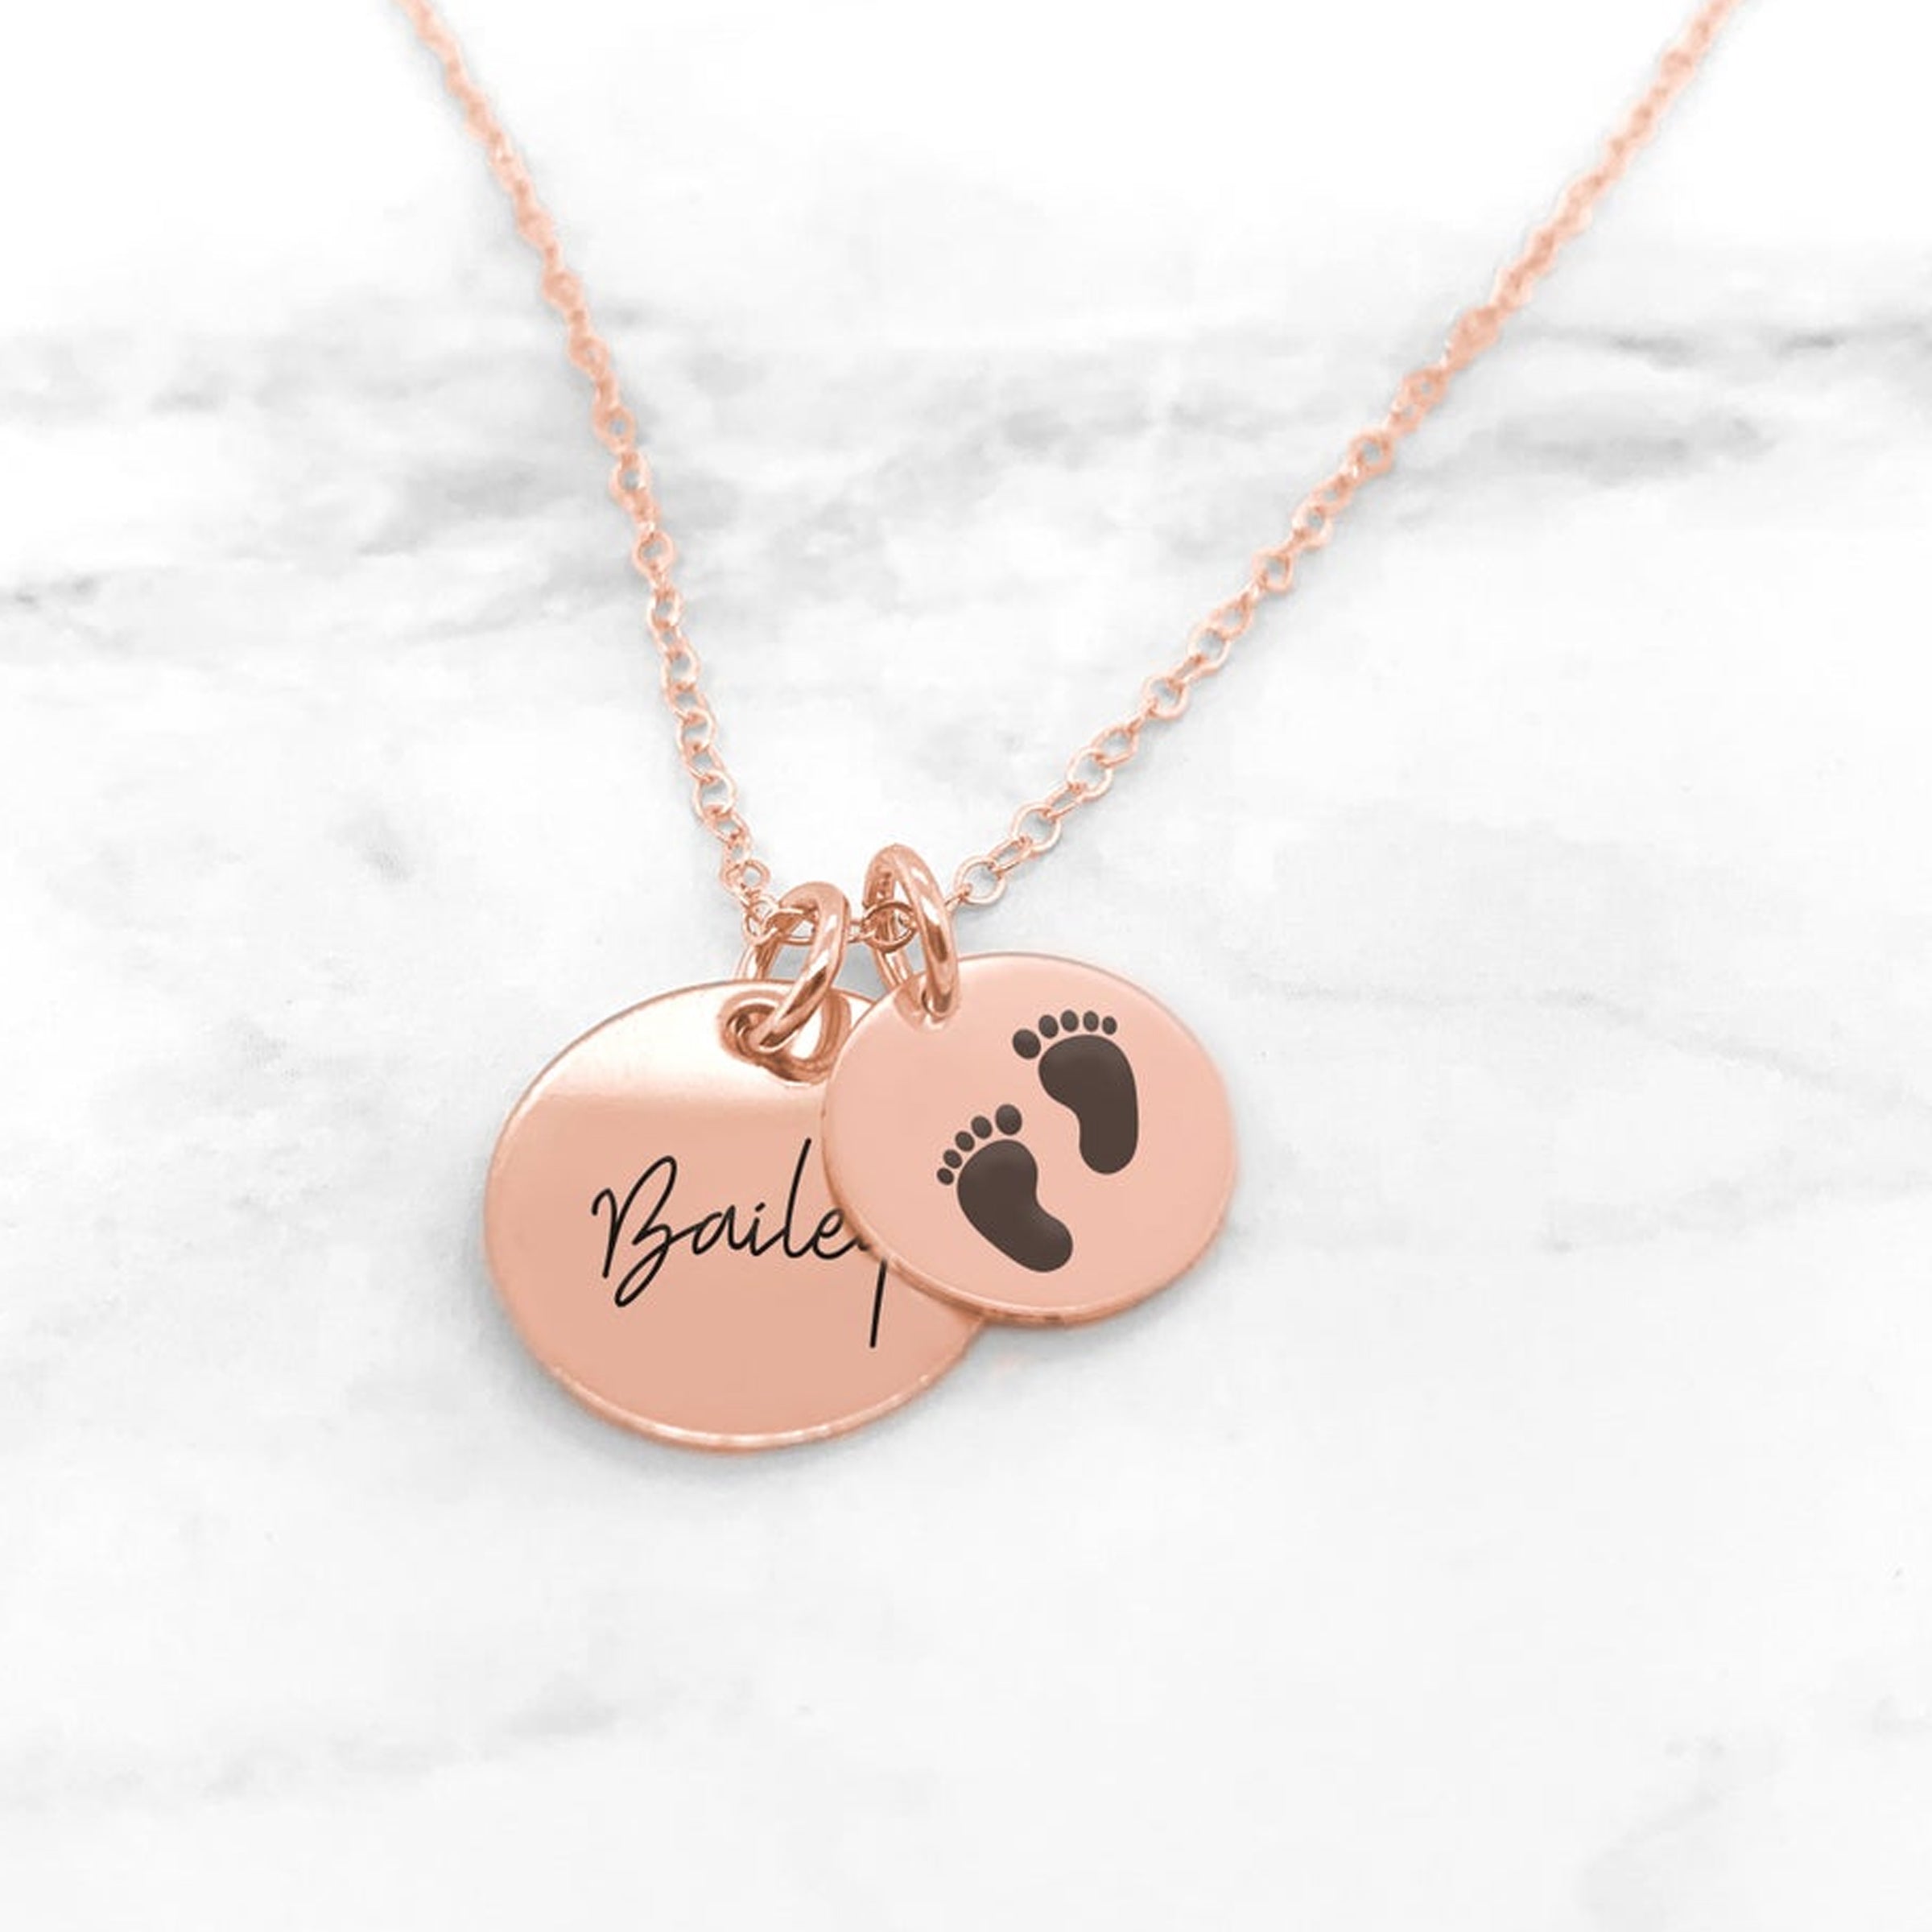 Personalized Stainless Steel Pet Photo Necklace With Engraved Disc  Wholesale Dropshipping Whimsical Mother Daughter Jewelry From Jewellerycn,  $5.43 | DHgate.Com